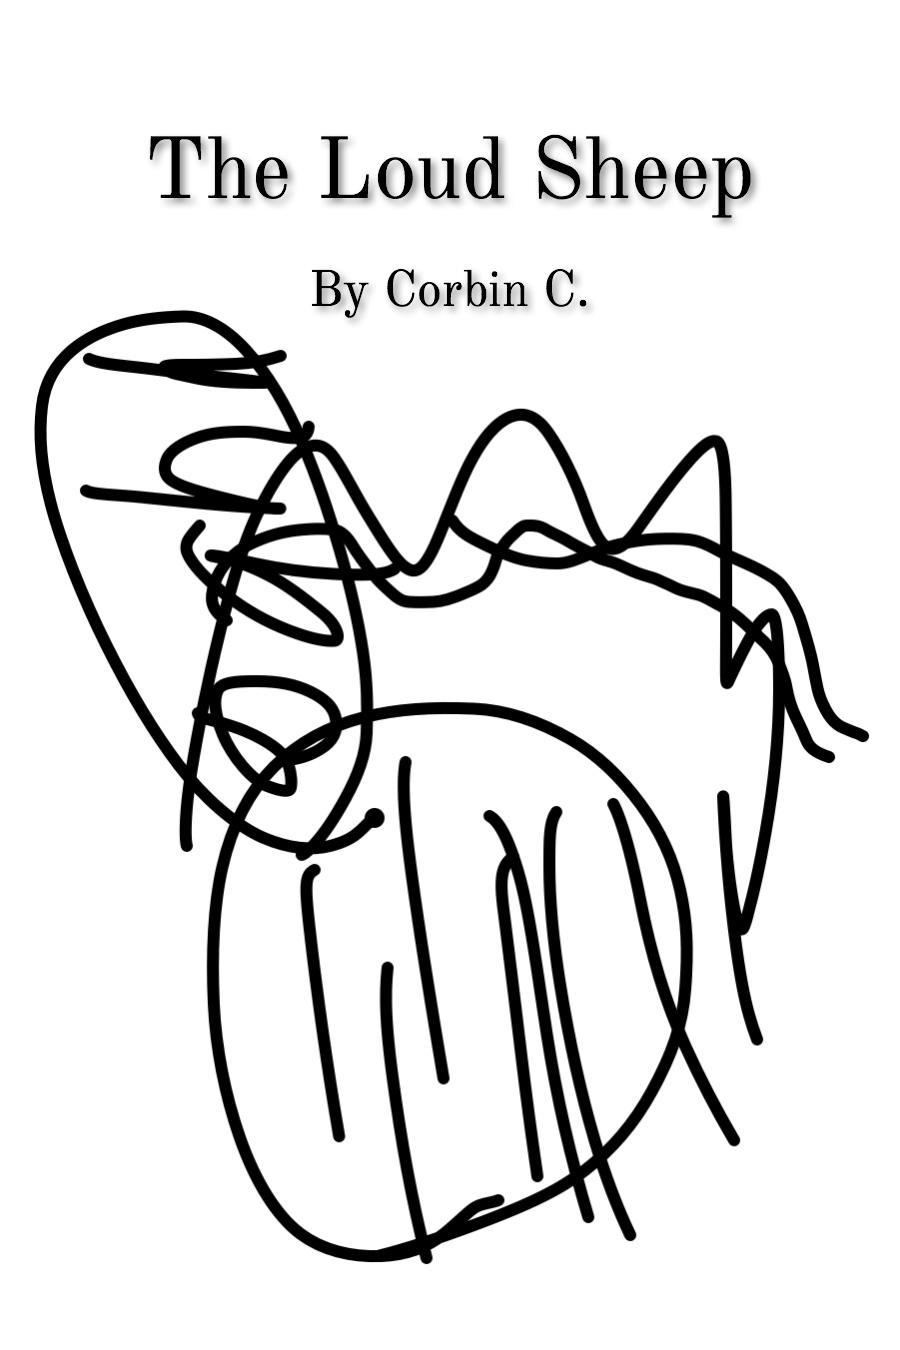 The Loud Sheep Books 6 and 7 by Corbin C activities